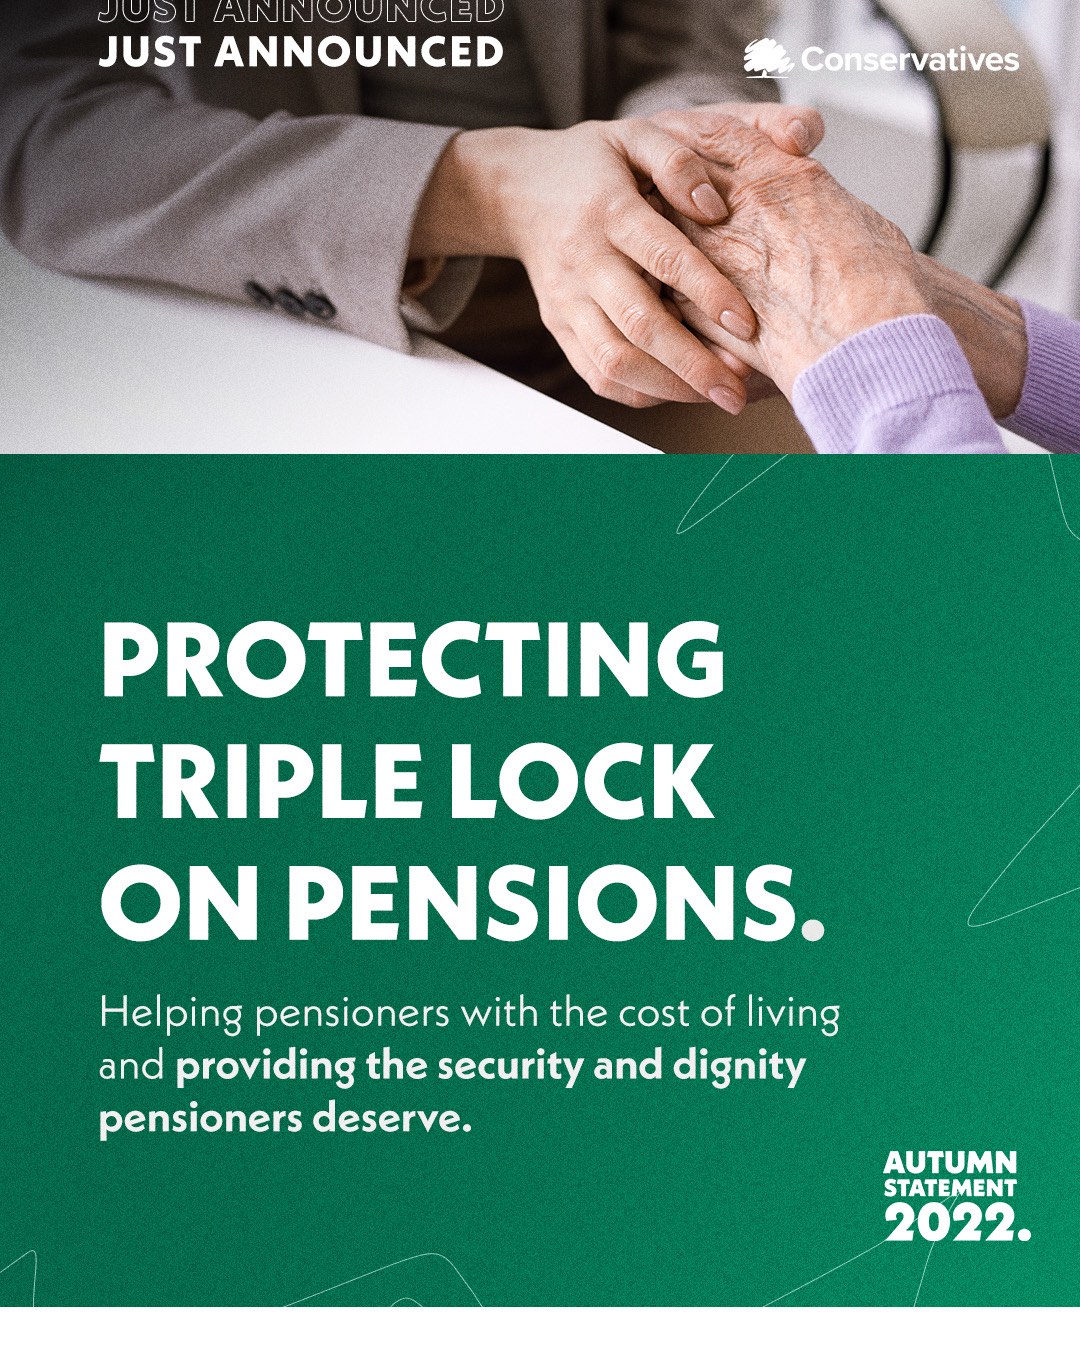 Protecting the pensions triple-lock